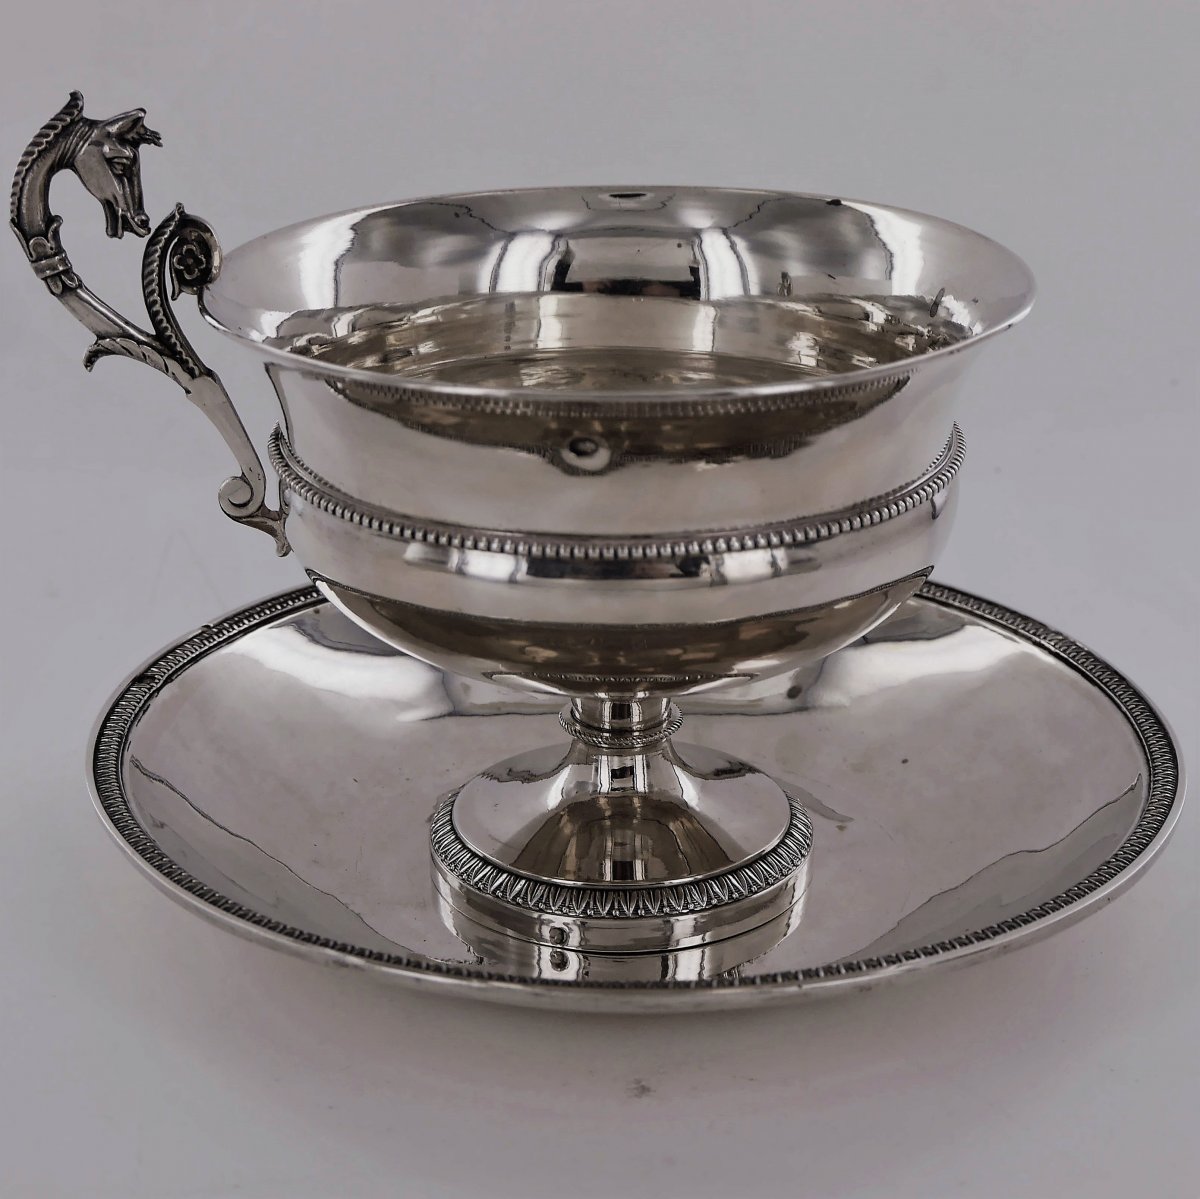 Chocolate Cup And Saucer, Sterling Silver, Empire Period, Early 19th Century-photo-3